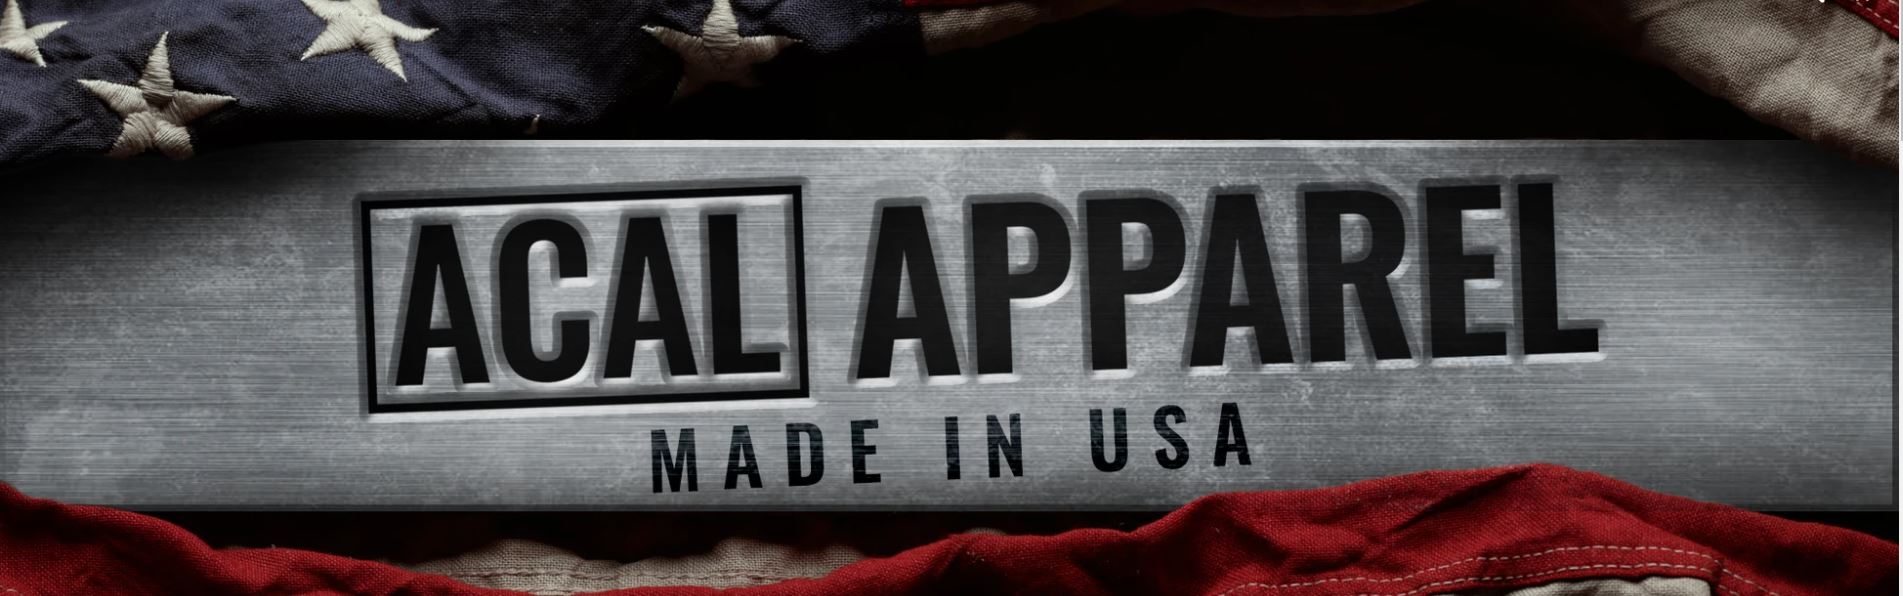 Acal Apparel Review 2